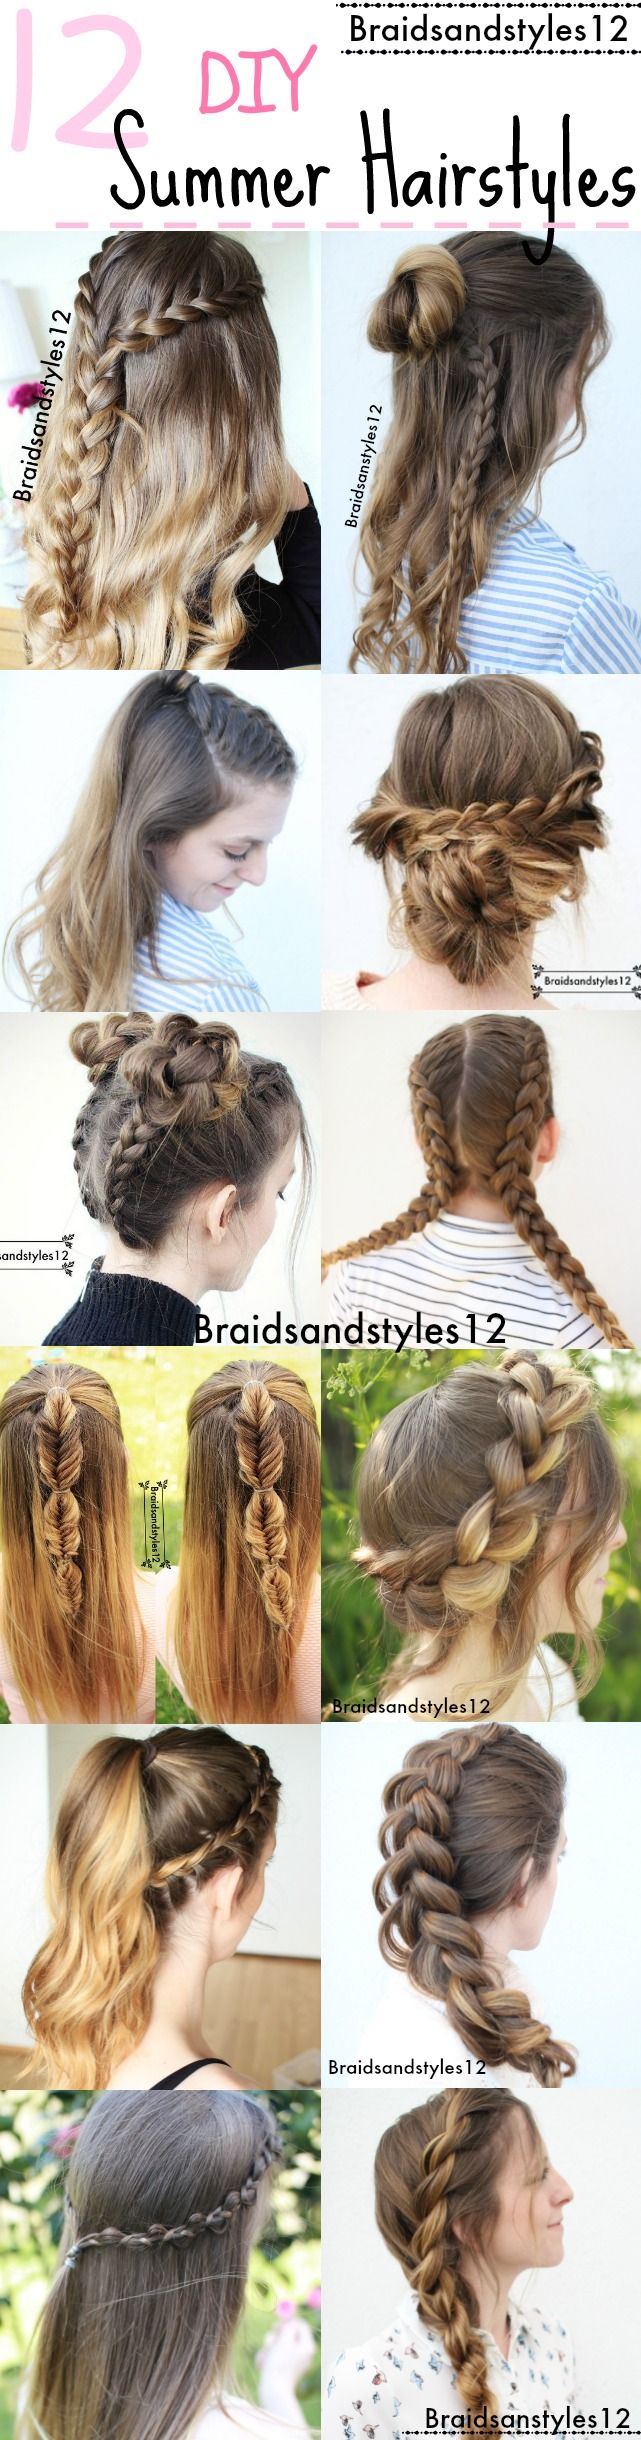 [ad_1]

12 Gorgeous DIY Summer Hairstyle Ideas by Braidsanstyles12. Beachy Hairstyles by Braidsandstyles12.
Source by olivia1robinson
[ad_2]
			
			…